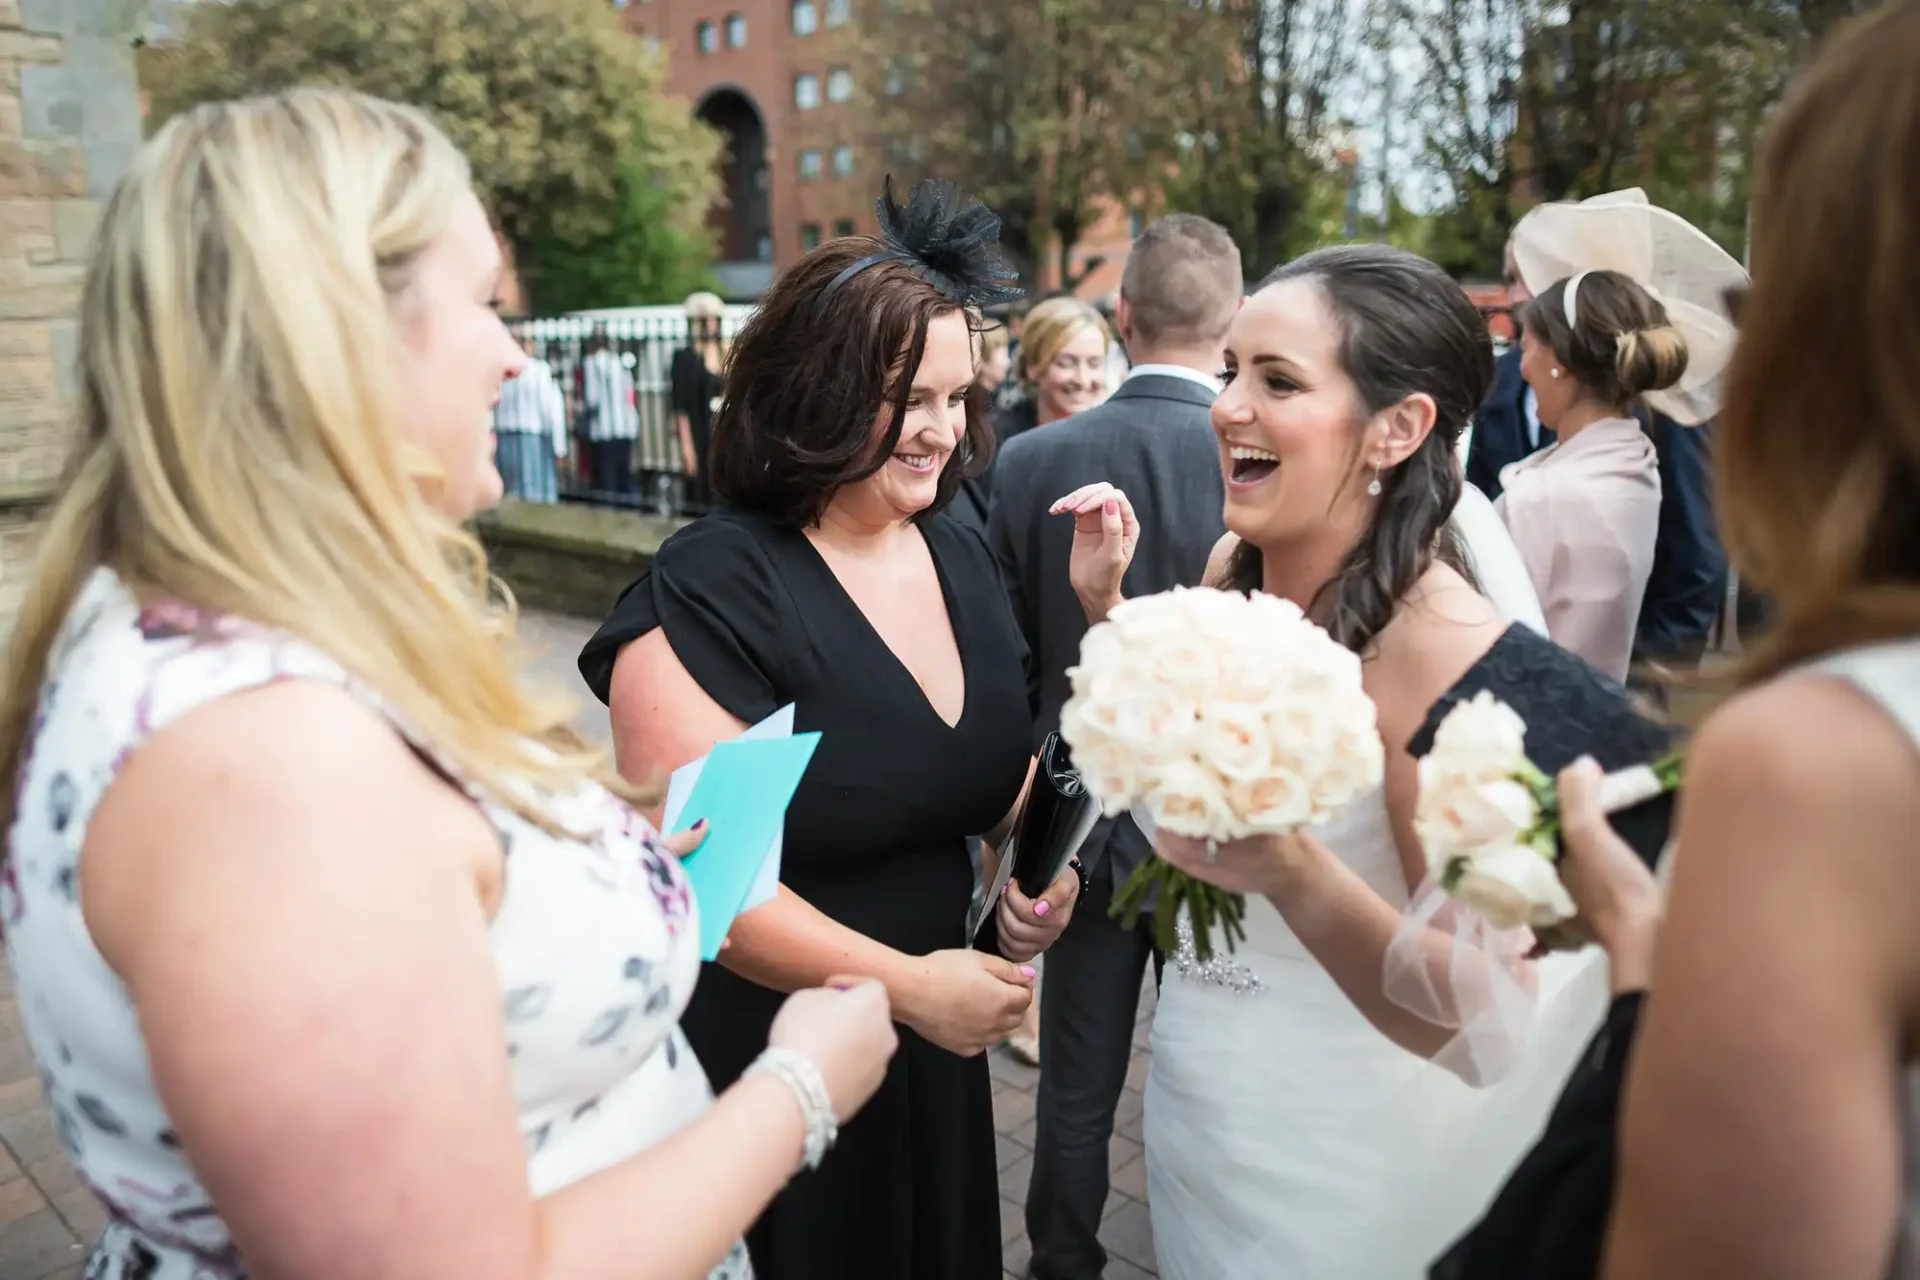 A bride holding a bouquet laughs joyfully with two women during a wedding celebration outdoors.